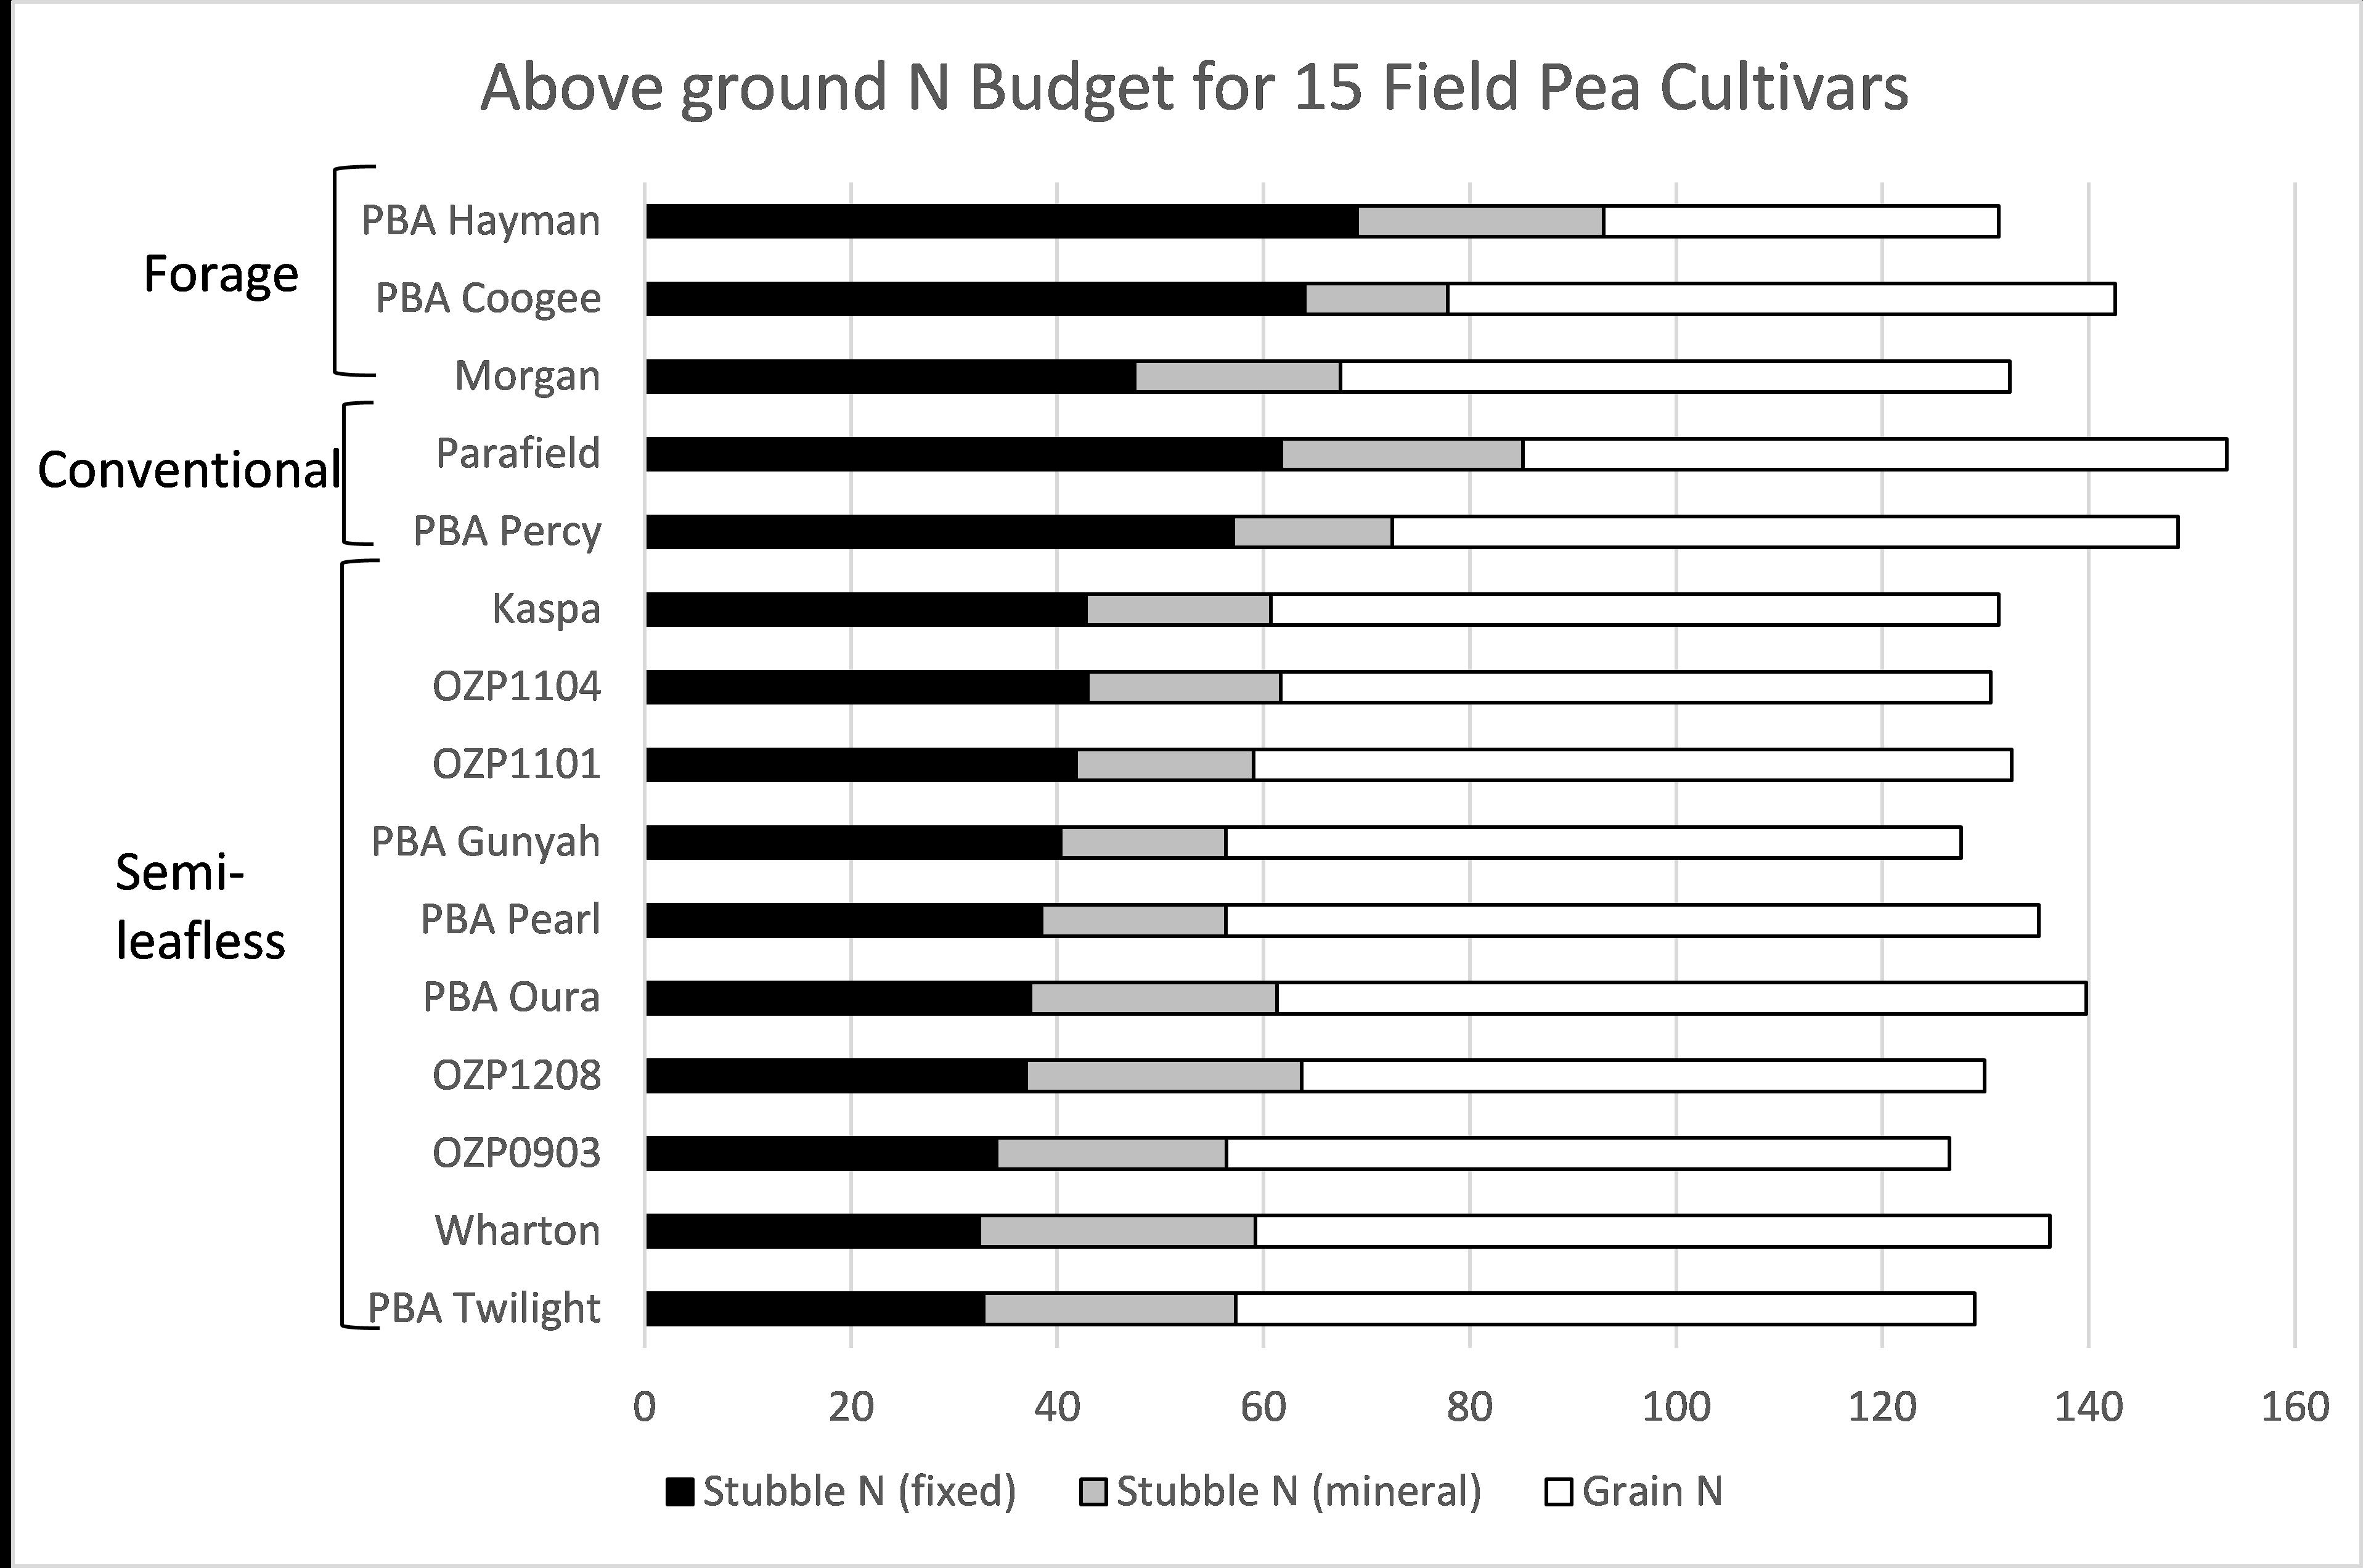 Figure 2: Above ground N budget for 15 cultivars of field pea. Data is the average of five trials (2012-2015). For Stubble N (fixed); P<0.05, lsd=11, For Stubble N (mineral); No significant differences, For Grain N; P<0.001, lsd=7.